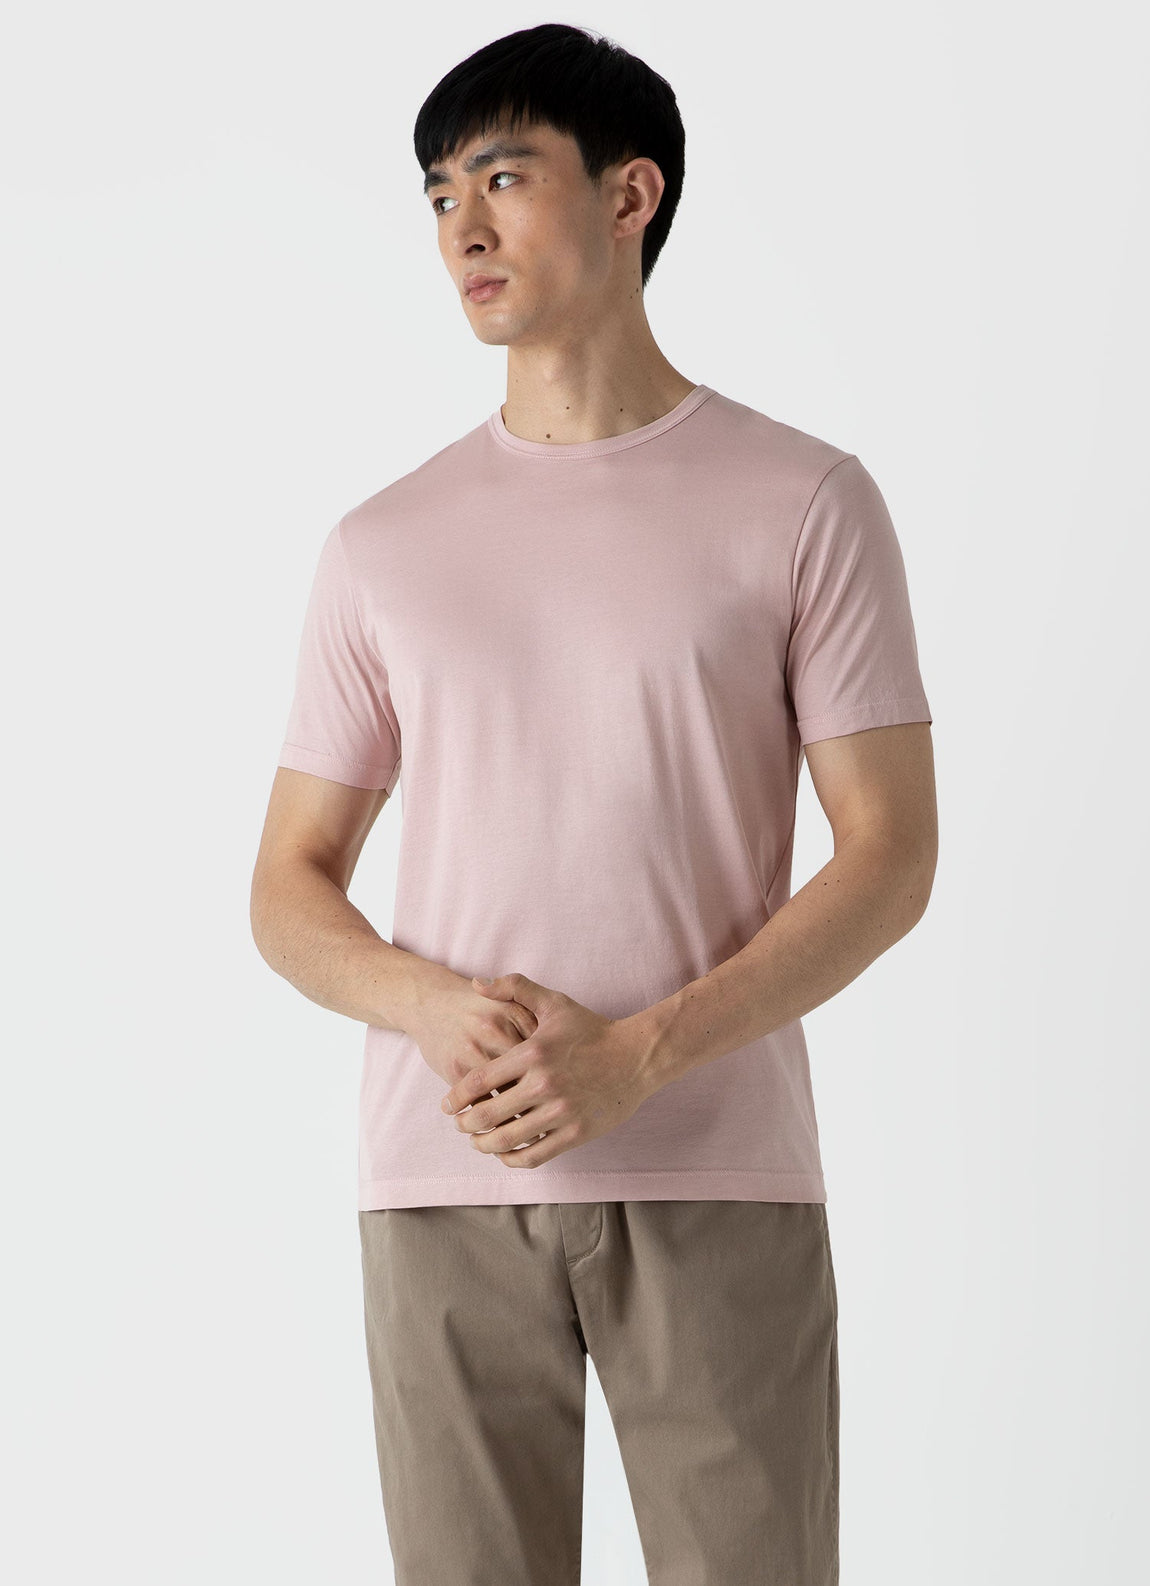 Men's Classic T-shirt in Shell Pink